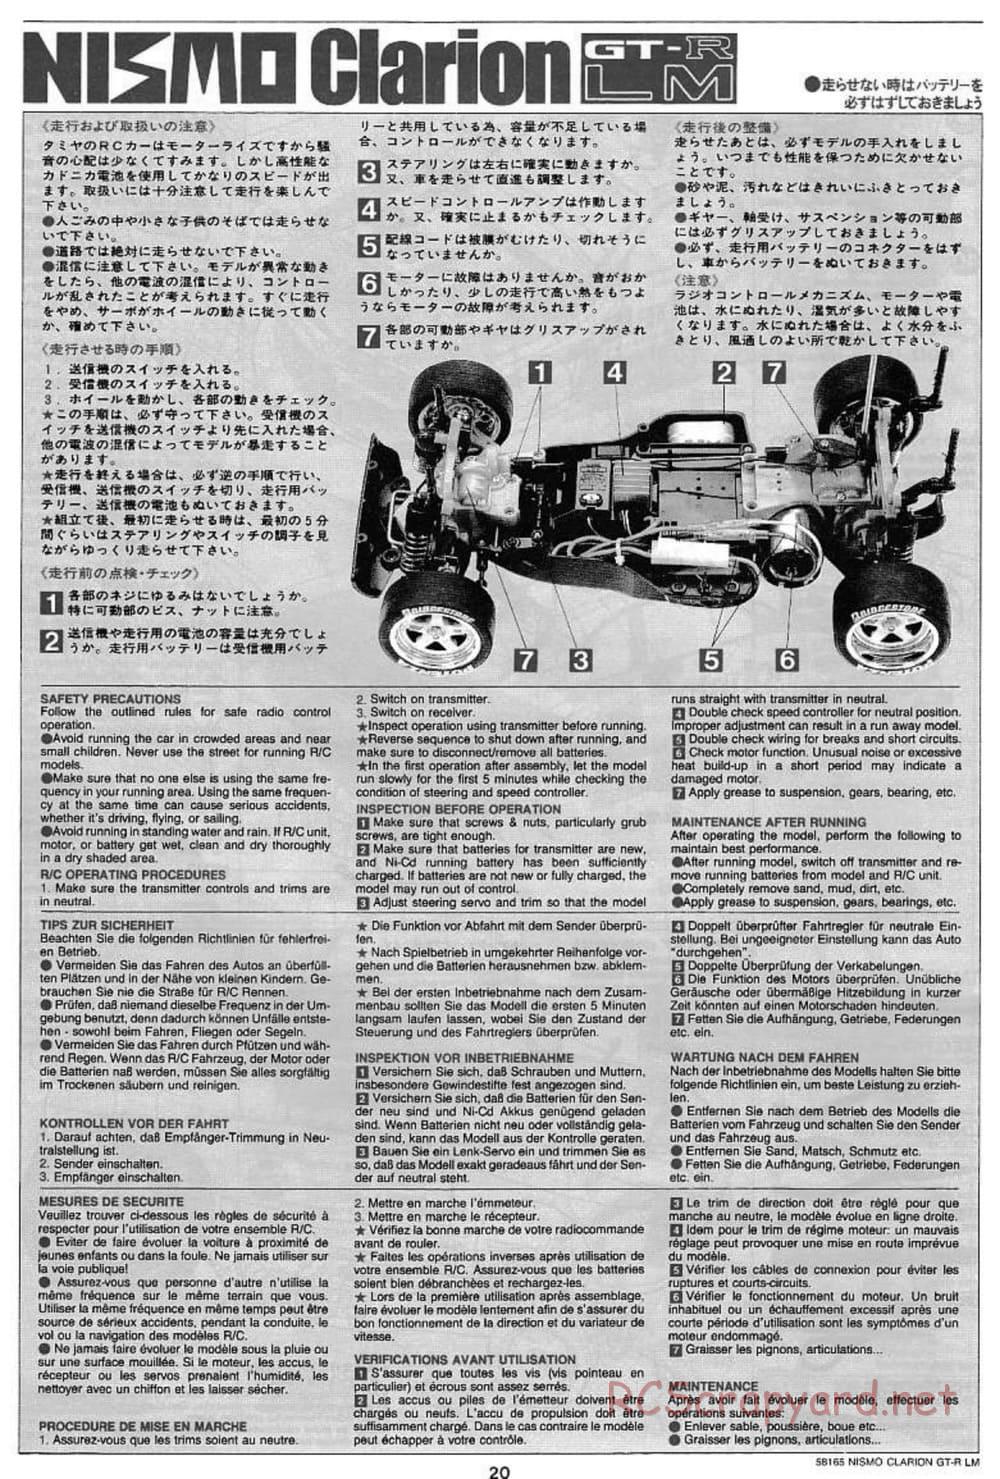 Tamiya - Nismo Clarion GT-R LM - TA-02W Chassis - Manual - Page 20